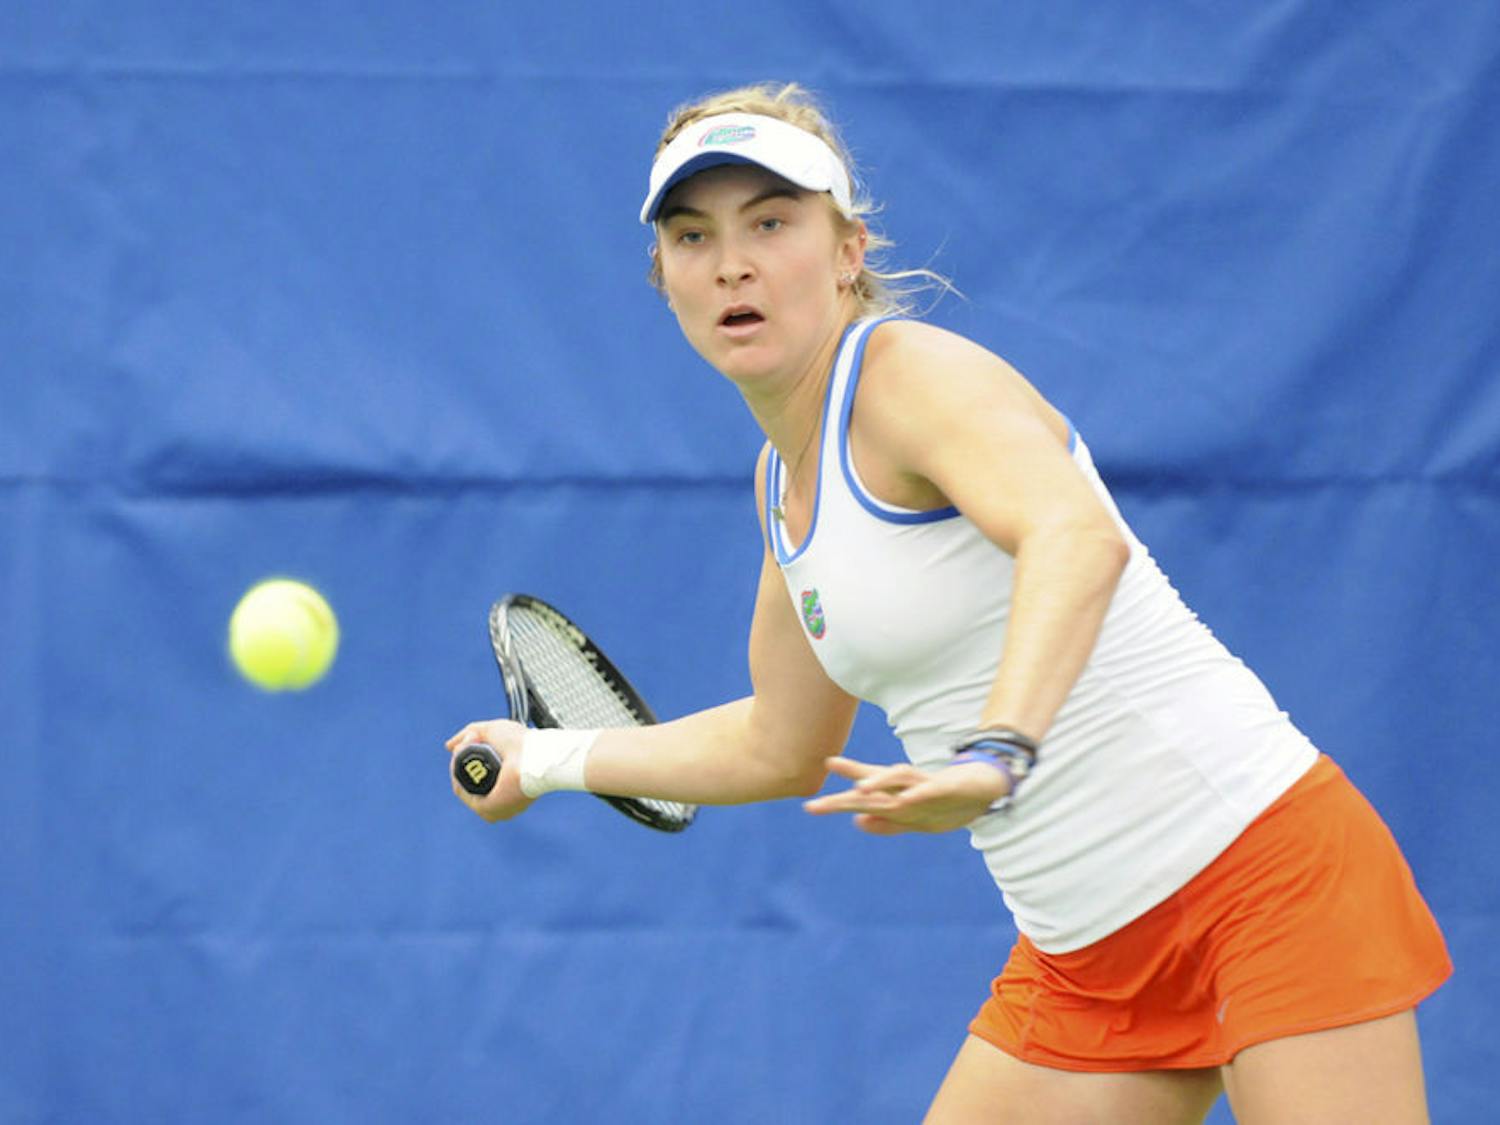 Senior Josie Kuhlman scored the deciding point in Florida's 4-2 win over Arkansas in the semifinals of the SEC Tournament. The Gators will face either Ole Miss or Vanderbilt for the title on Sunday.&nbsp;